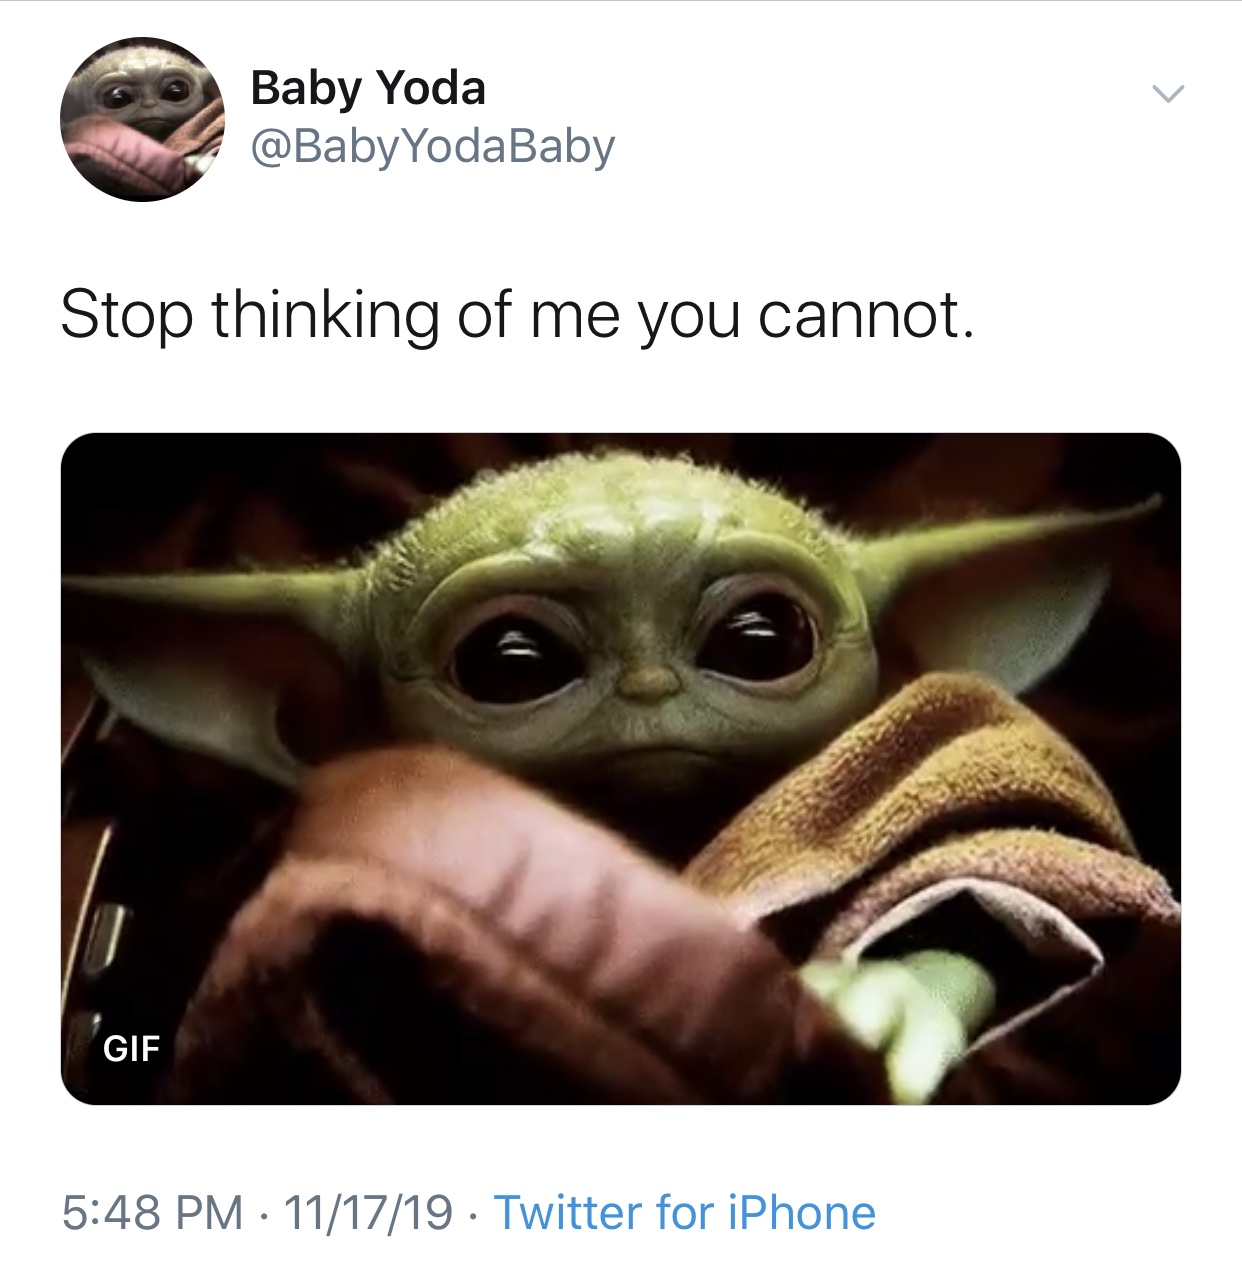 baby yoda meme - photo caption - Baby Yoda Stop thinking of me you cannot. Gif 111719 . Twitter for iPhone